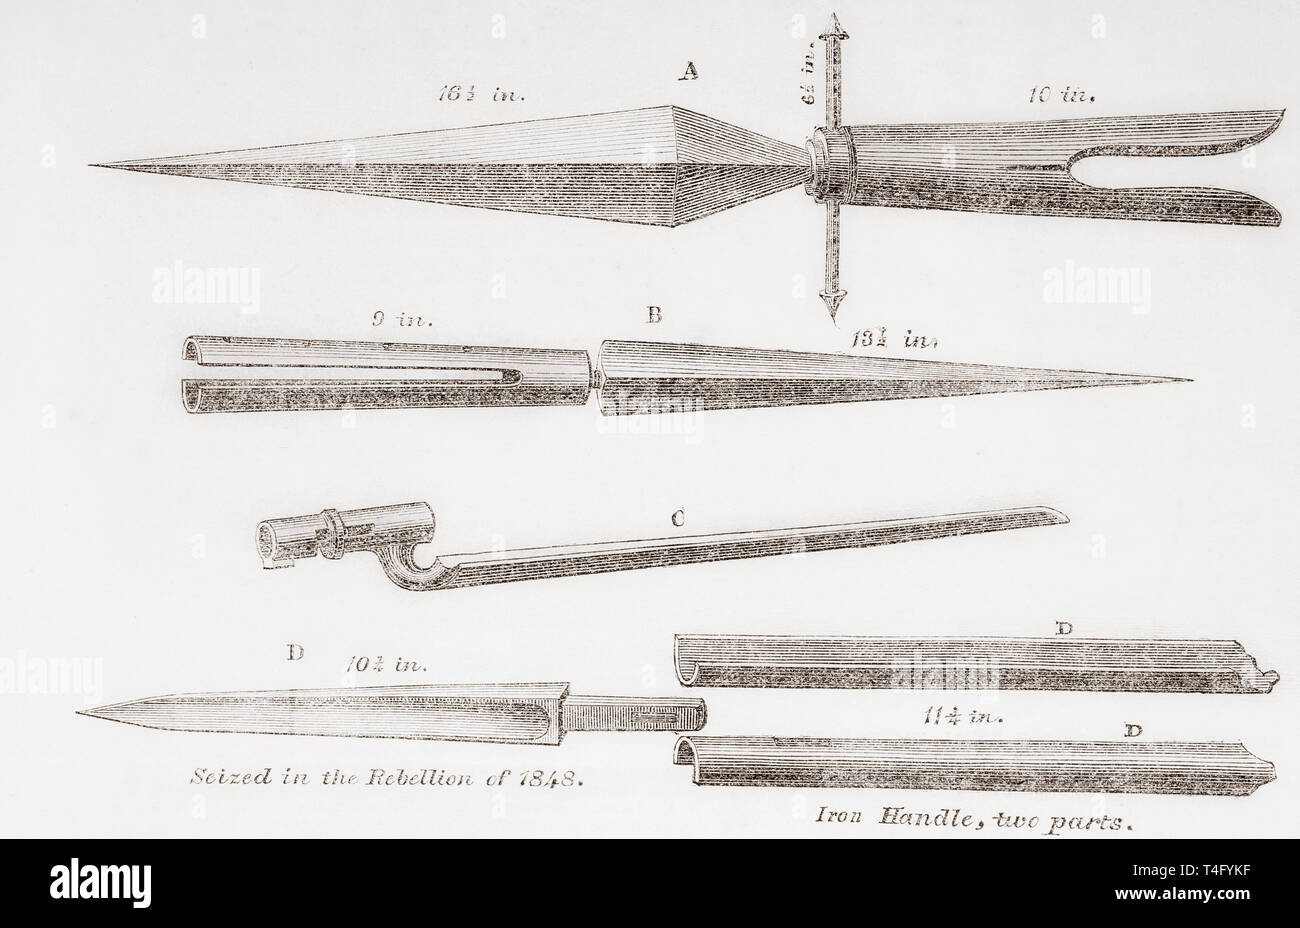 Fenian weapons, 19th century.  From The Illustrated London News, published 1865. Stock Photo